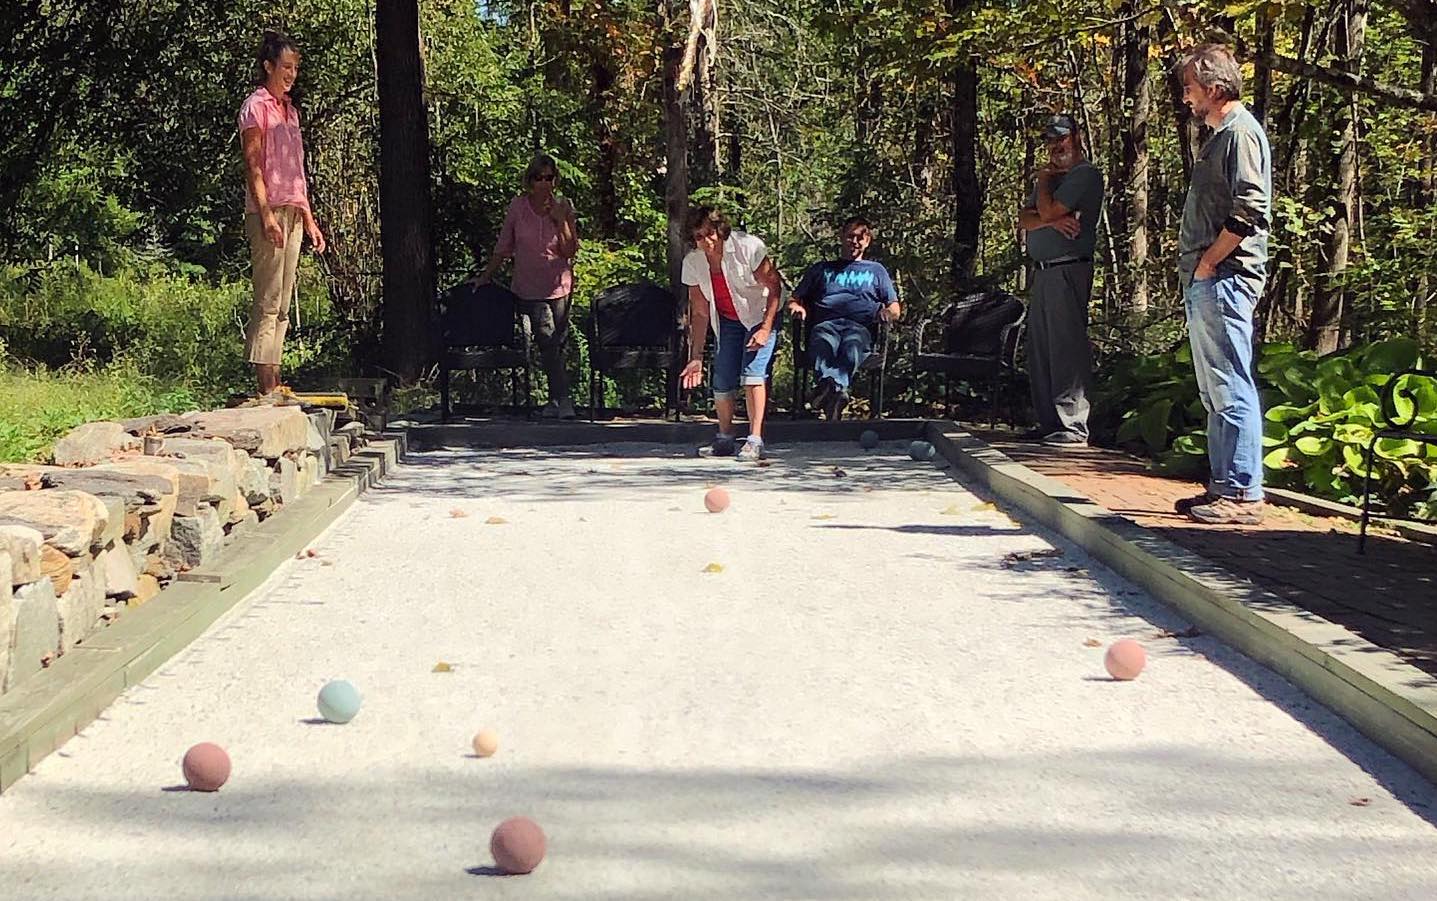 Bocce court players at Falls Village Flower Farm